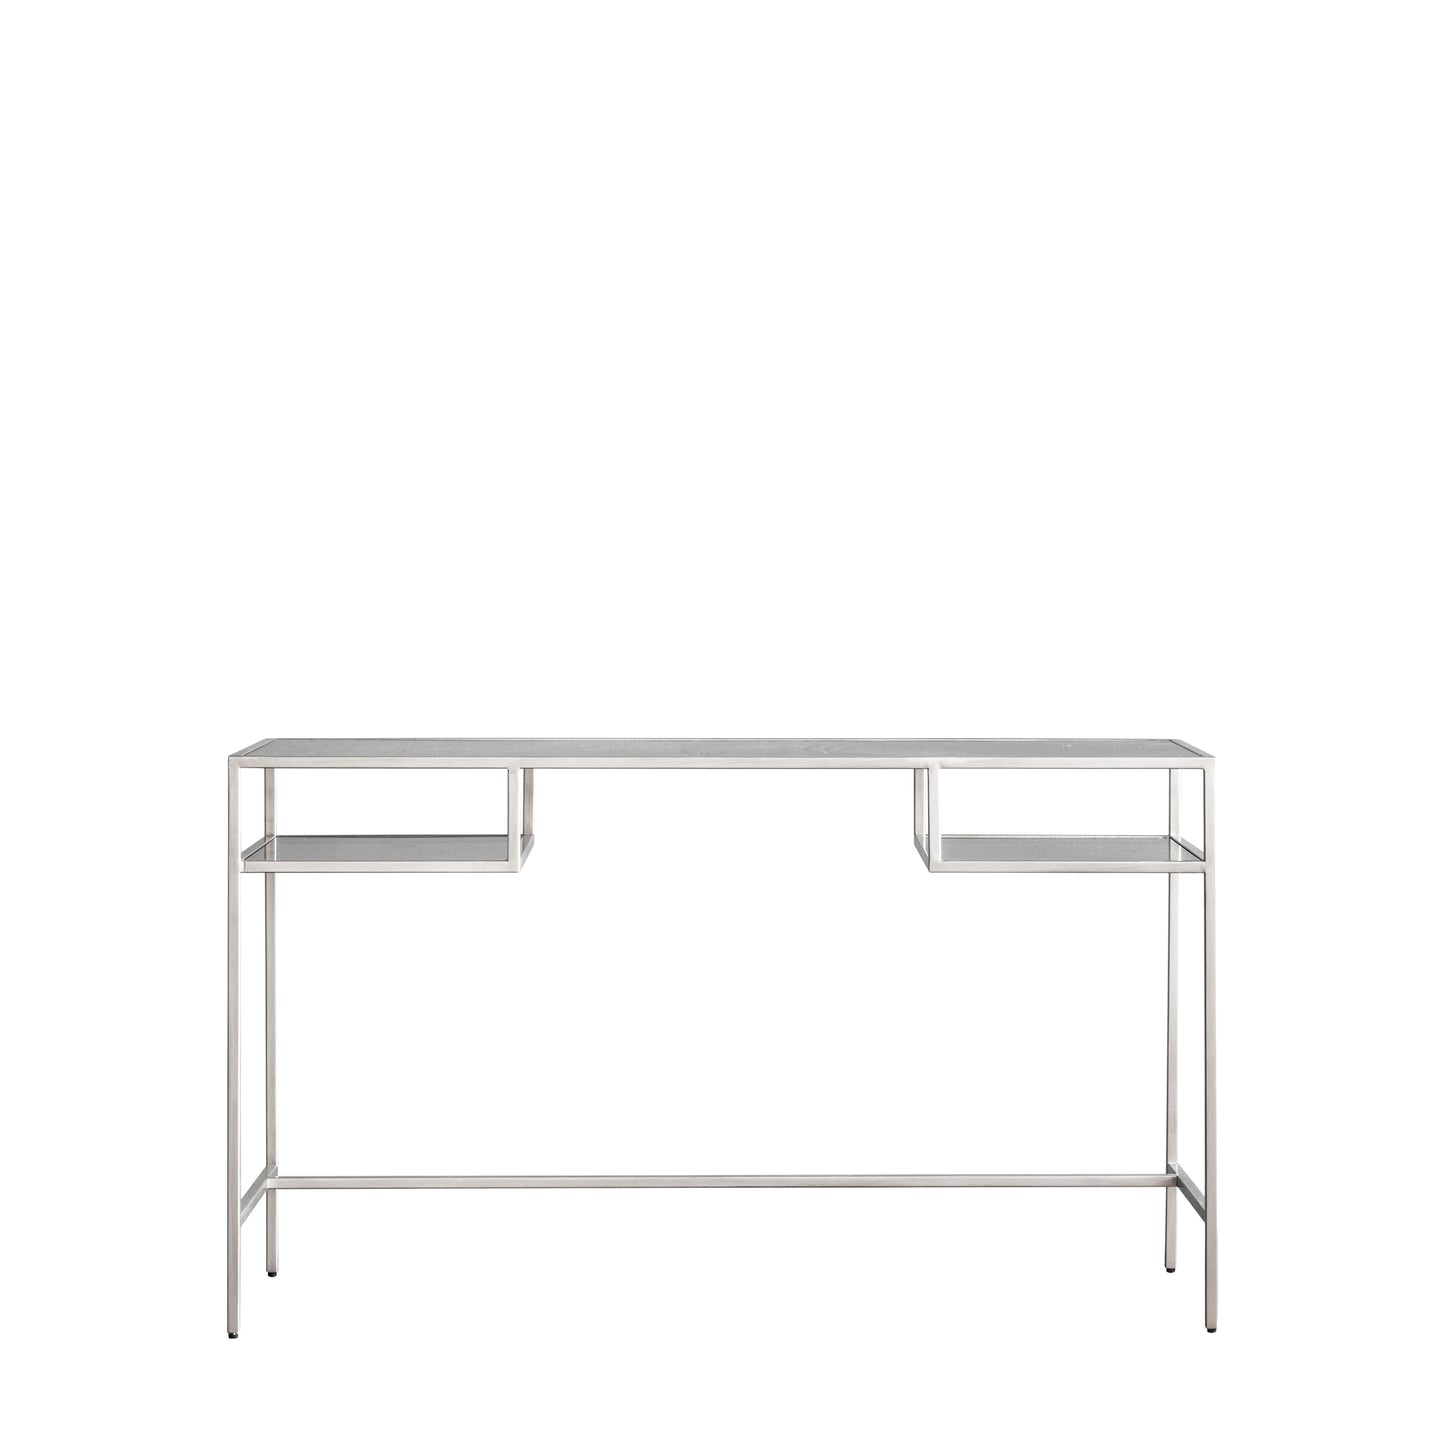 An Engleborne Desk Silver 1300x500x760mm with a metal frame for home furniture and interior decor.